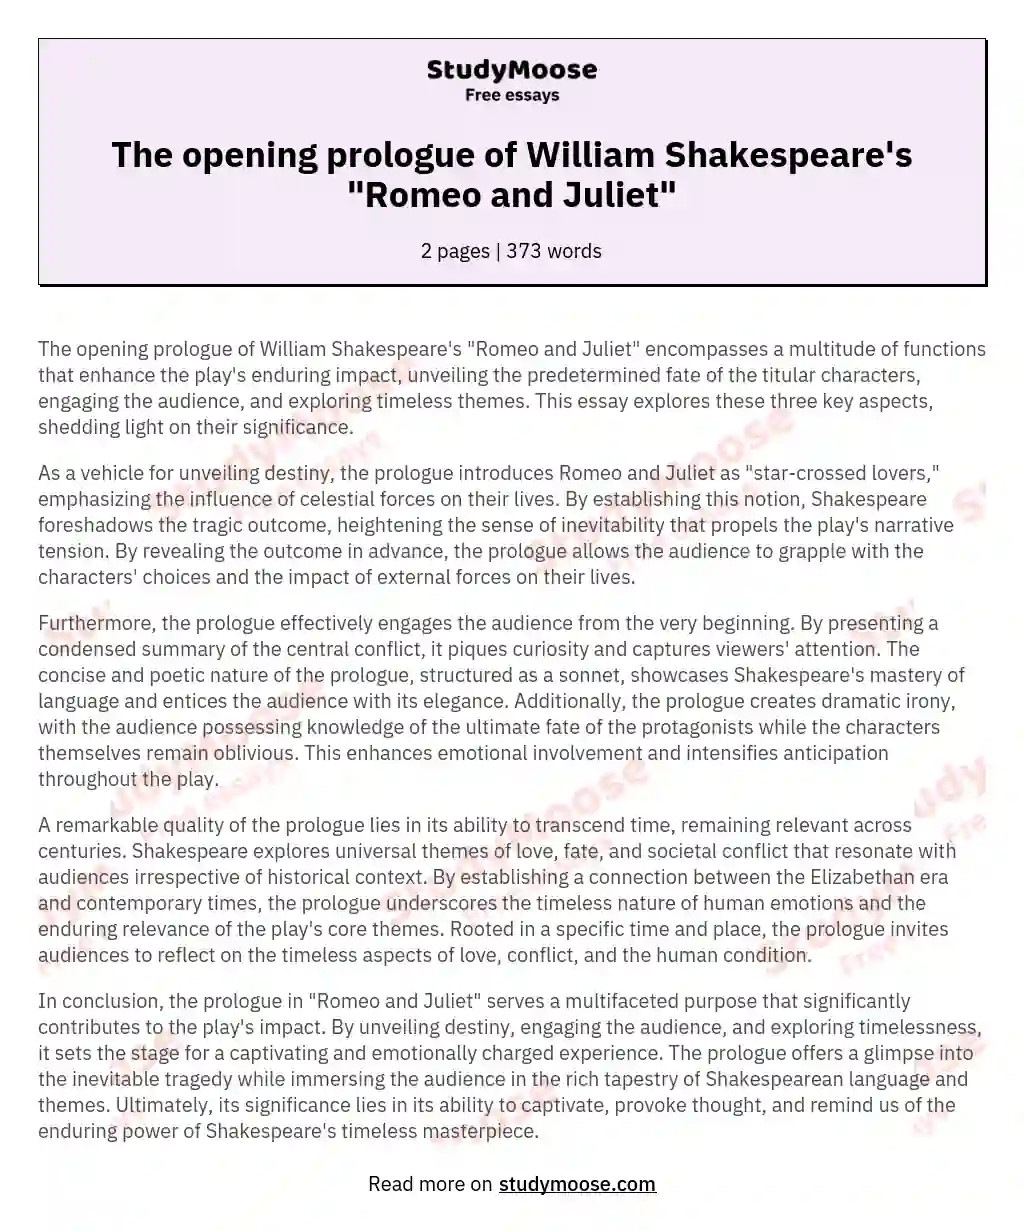 The opening prologue of William Shakespeare's "Romeo and Juliet" essay